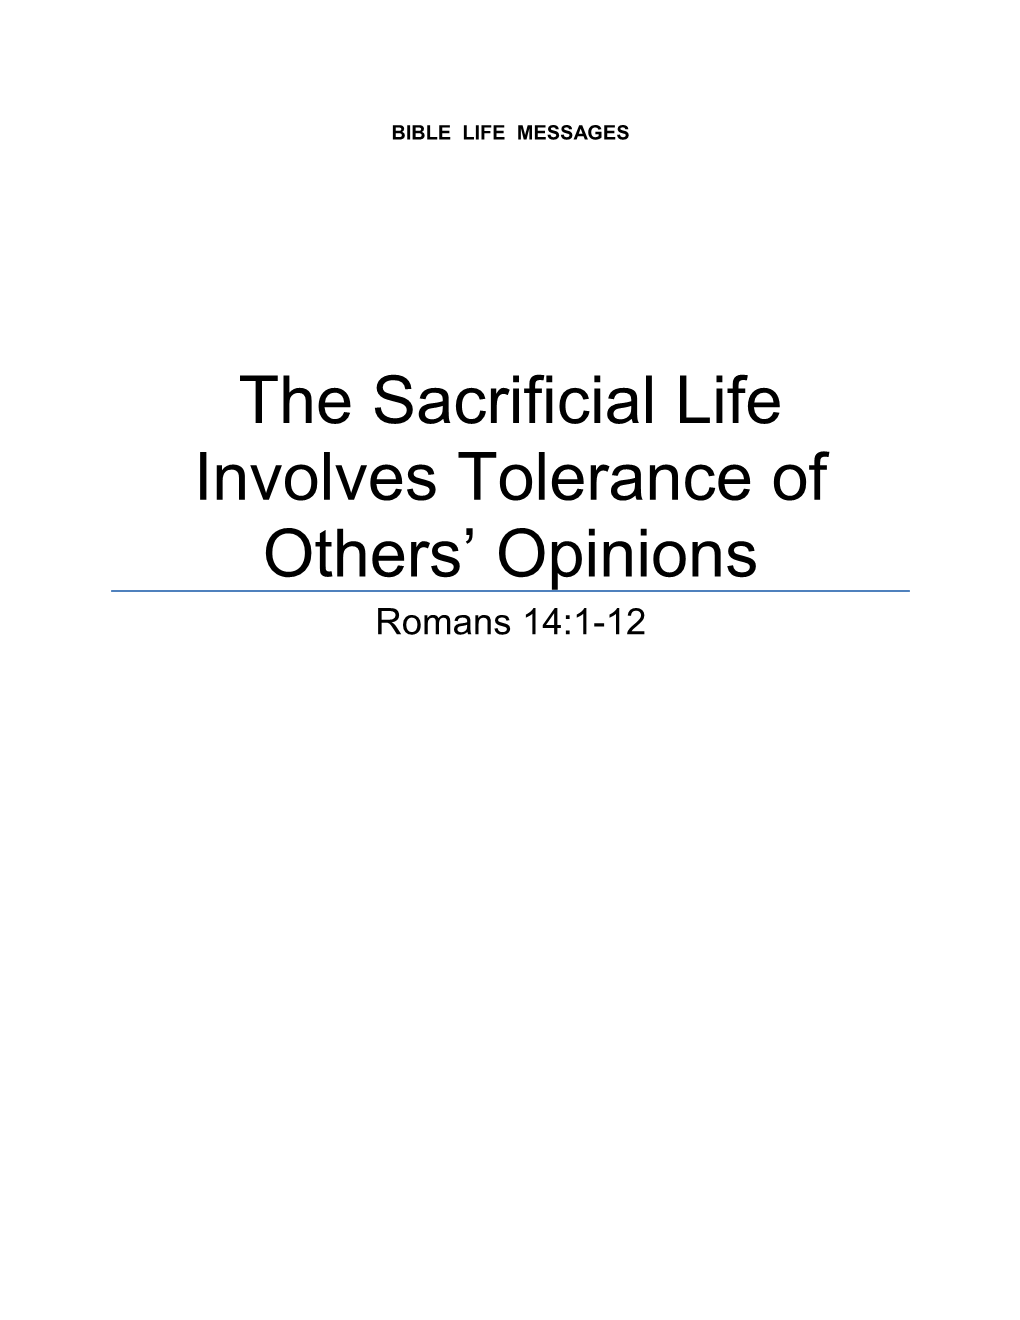 The Sacrificial Life Involves Tolerance of Others Opinions